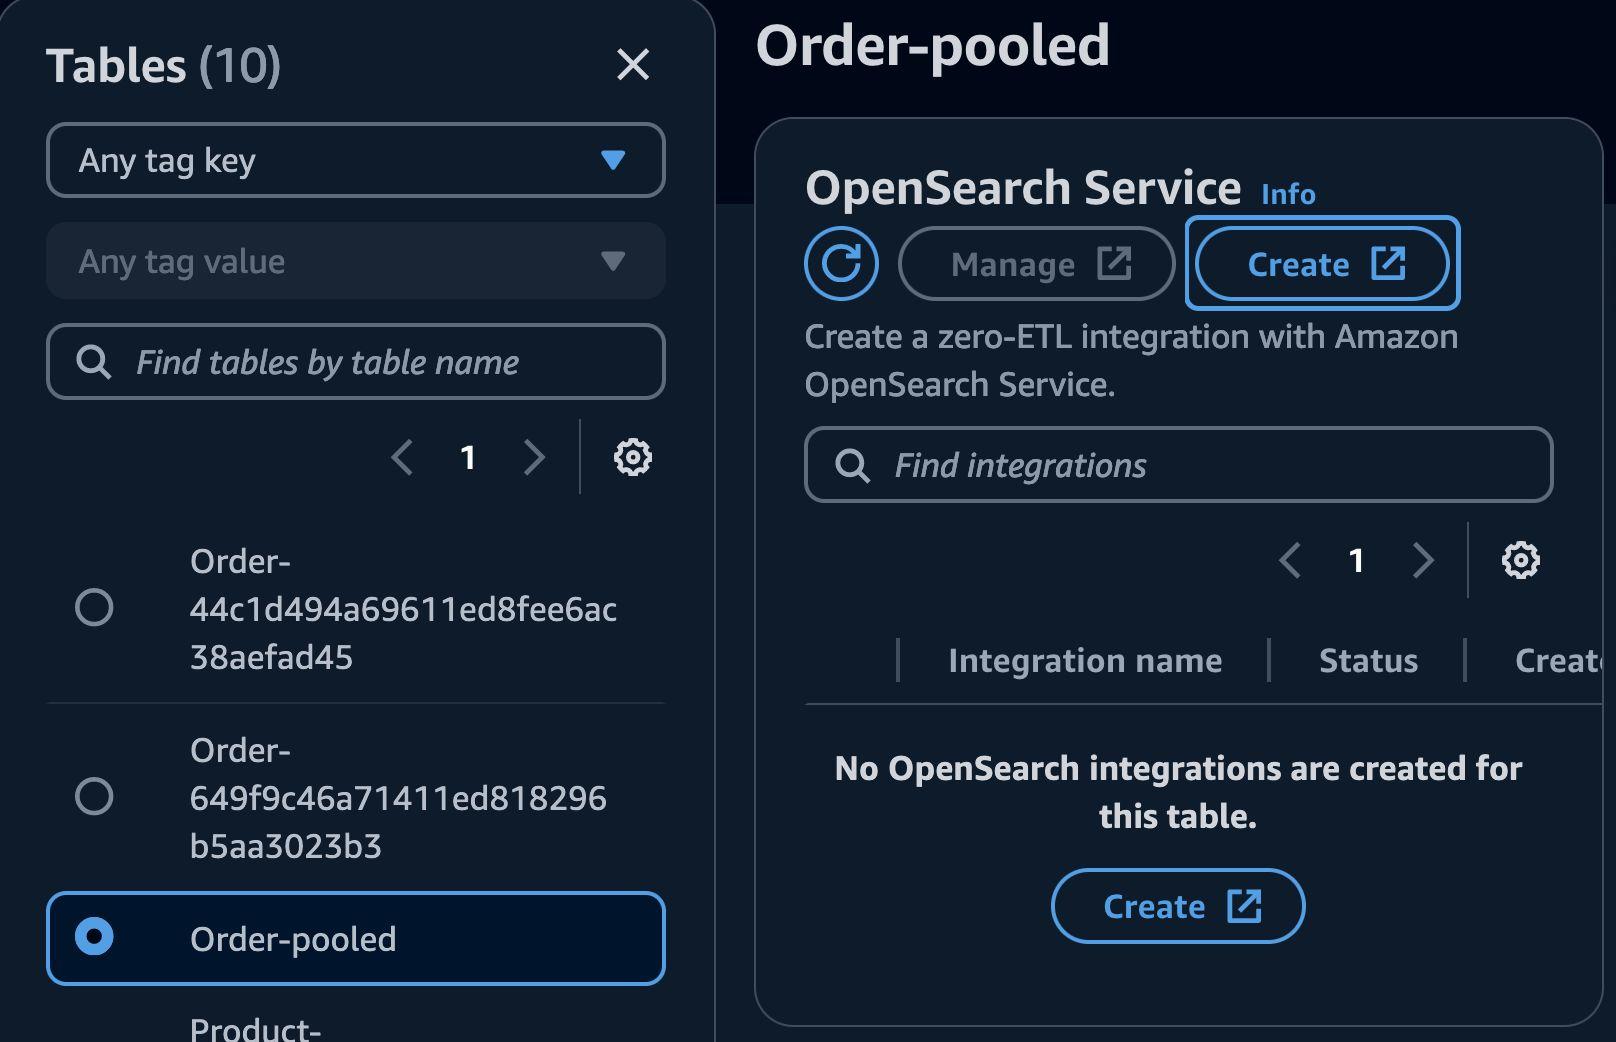 Figure 2 - OpenSearch Dialog Under Integrations in DynamoDB console